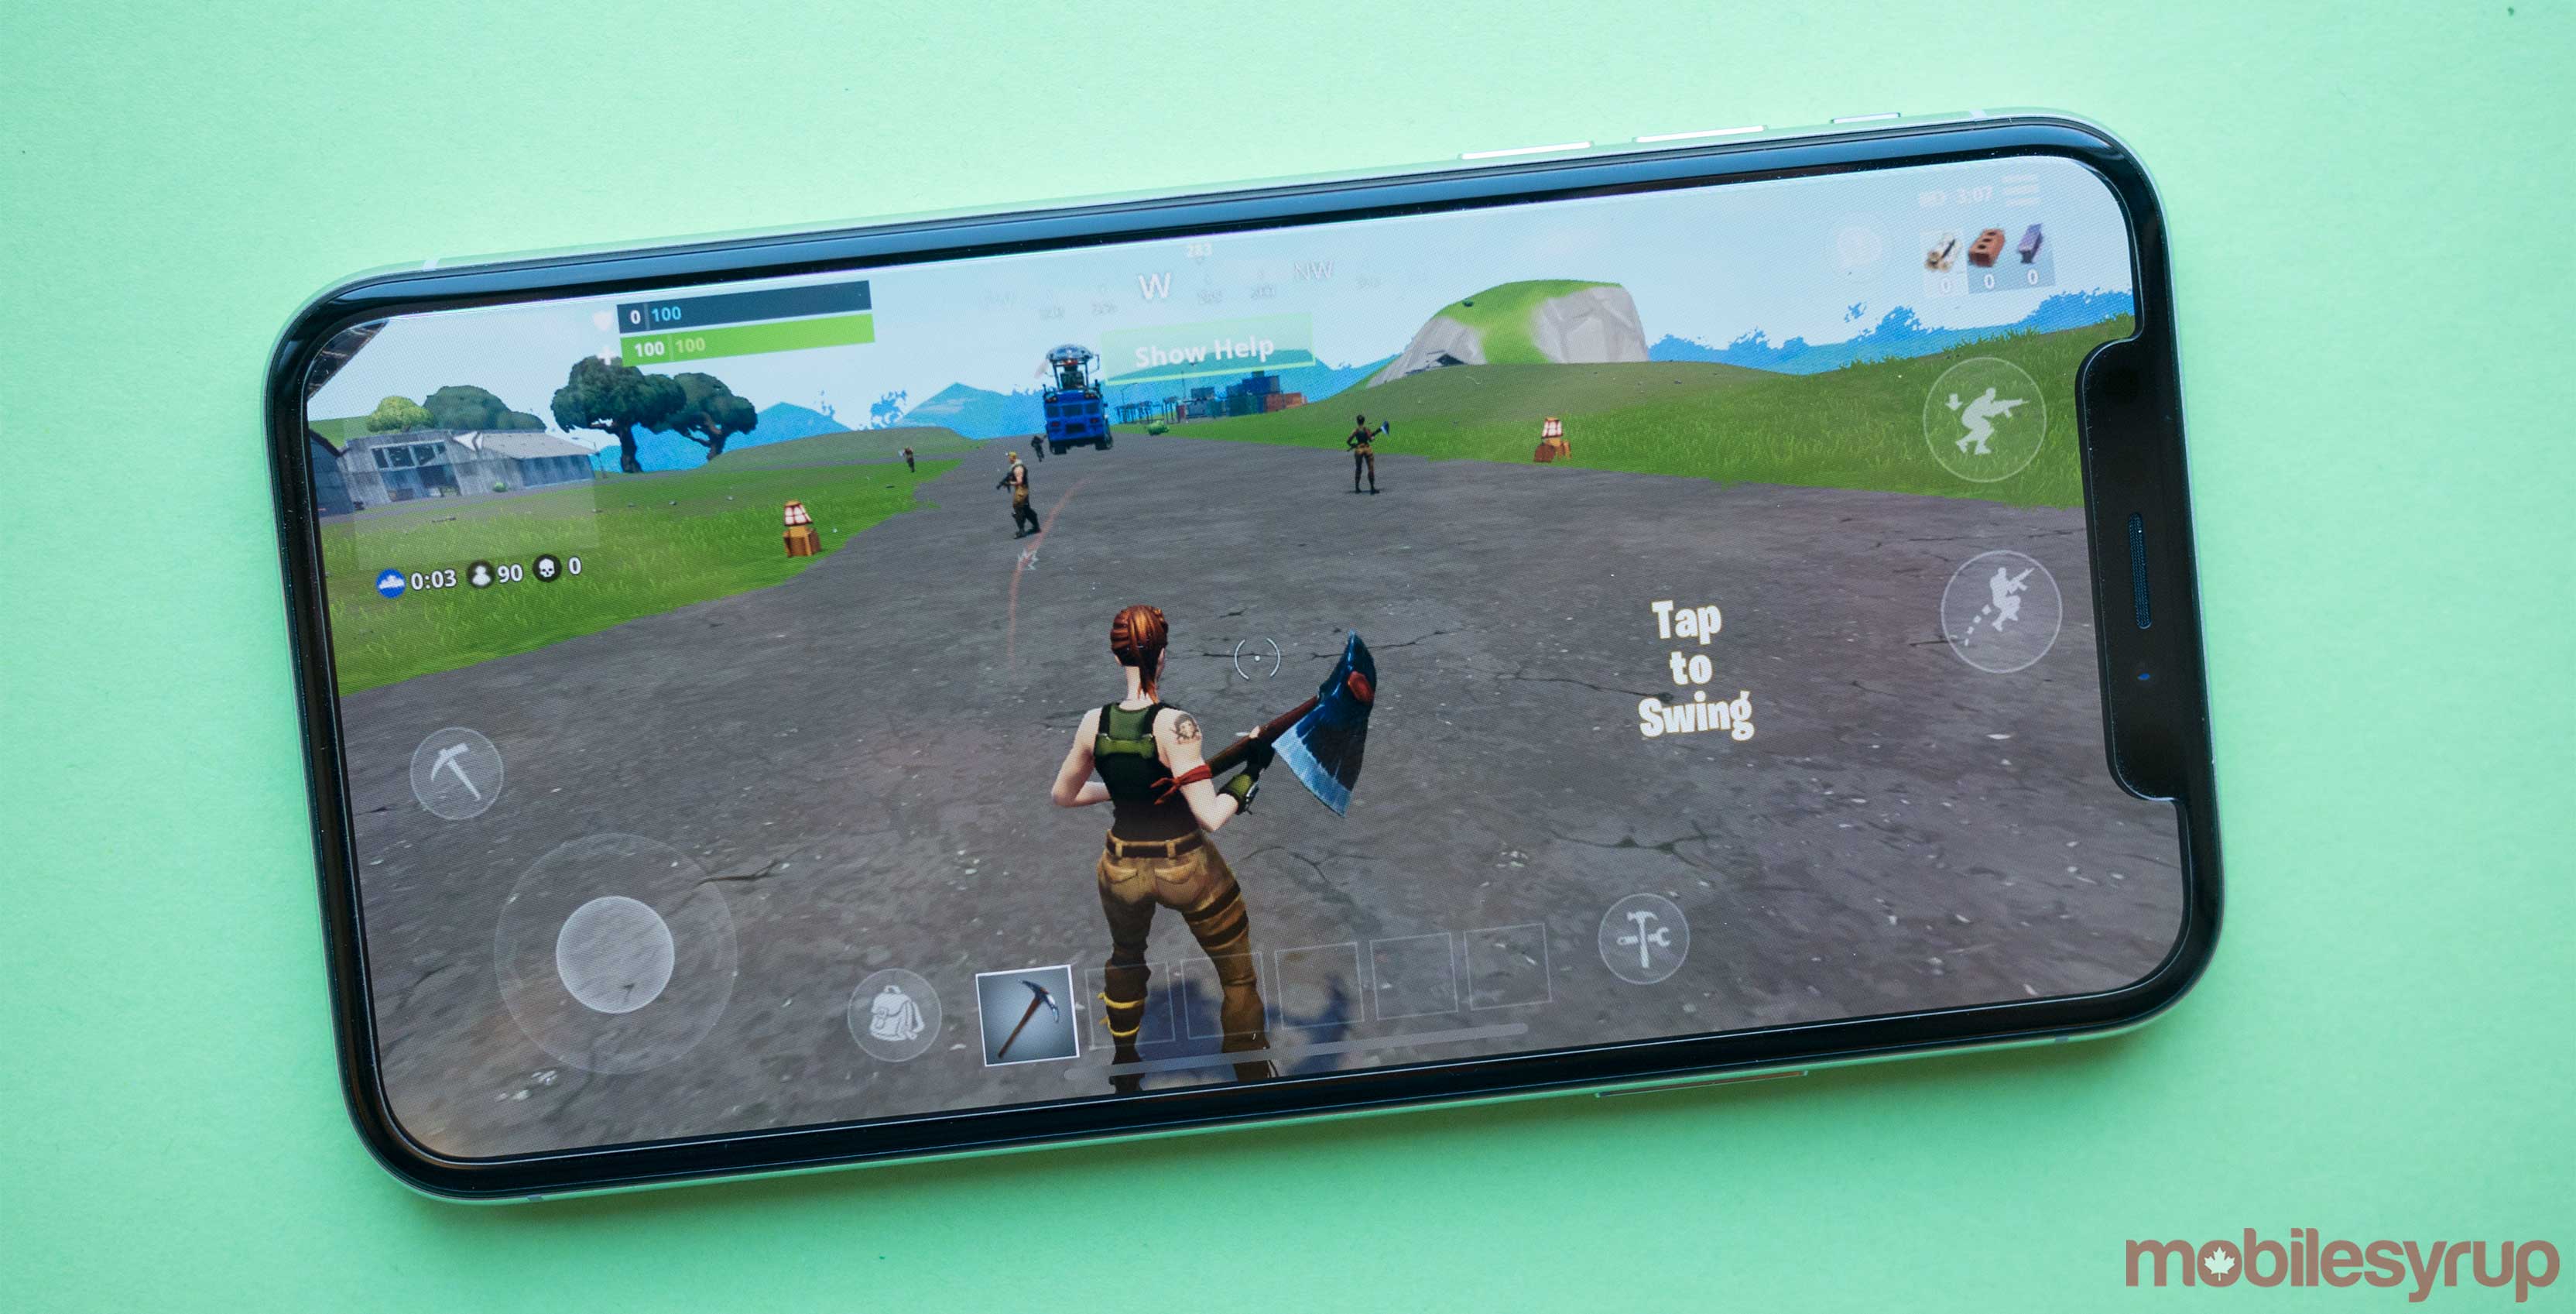 after launching in closed beta a few weeks ago the ios version of fortnite is now available to all ios users - all ipads that can run fortnite